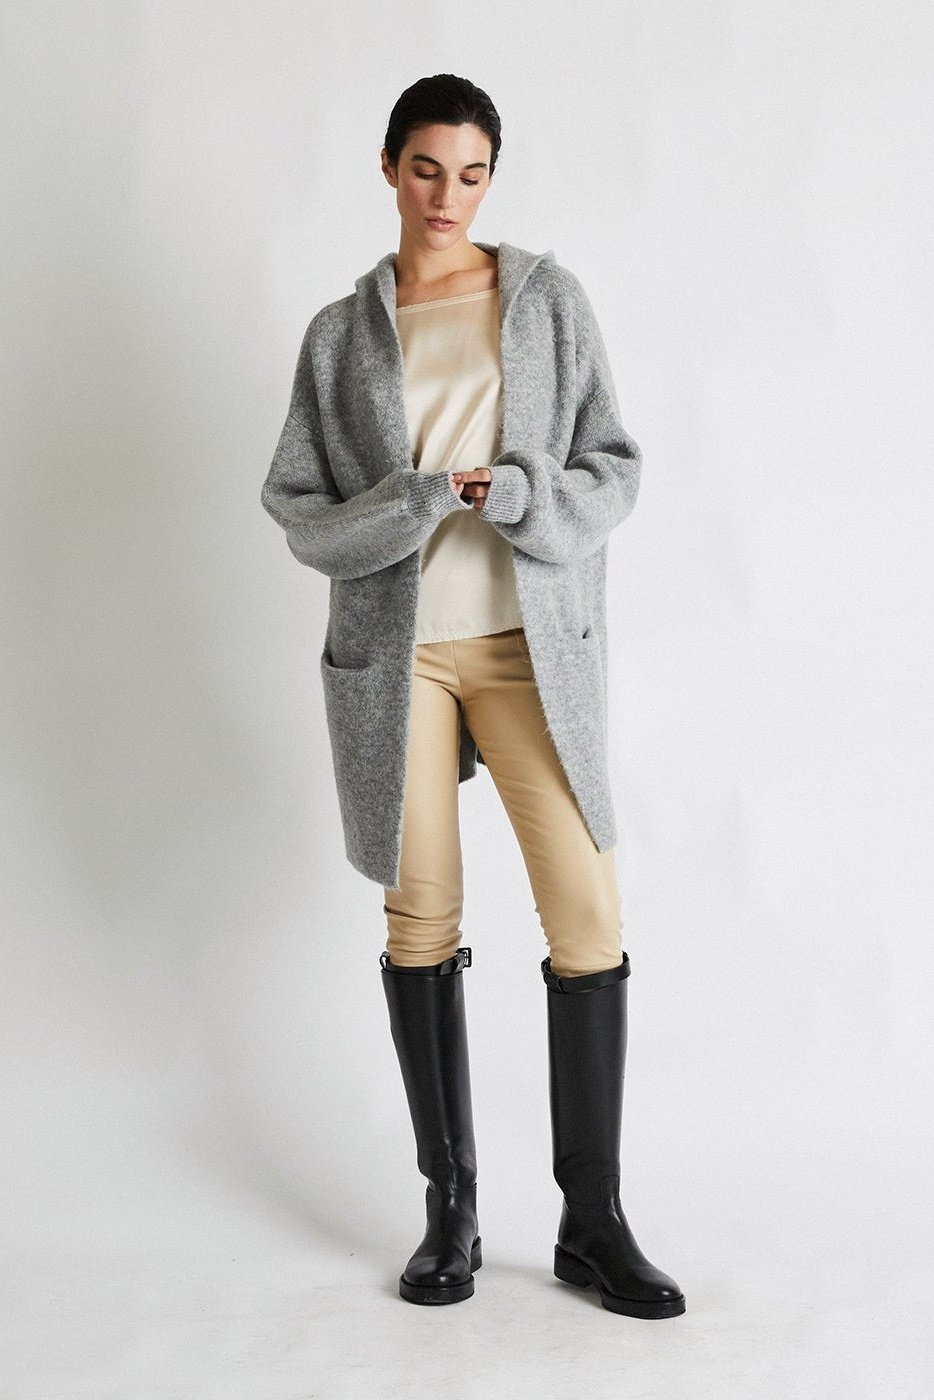 + Beryll Cashmere Cardigan with Hood Vivian | Gray - Cashmere Cardigan with Hood Vivian | Gray - +Beryll Worn By Good People